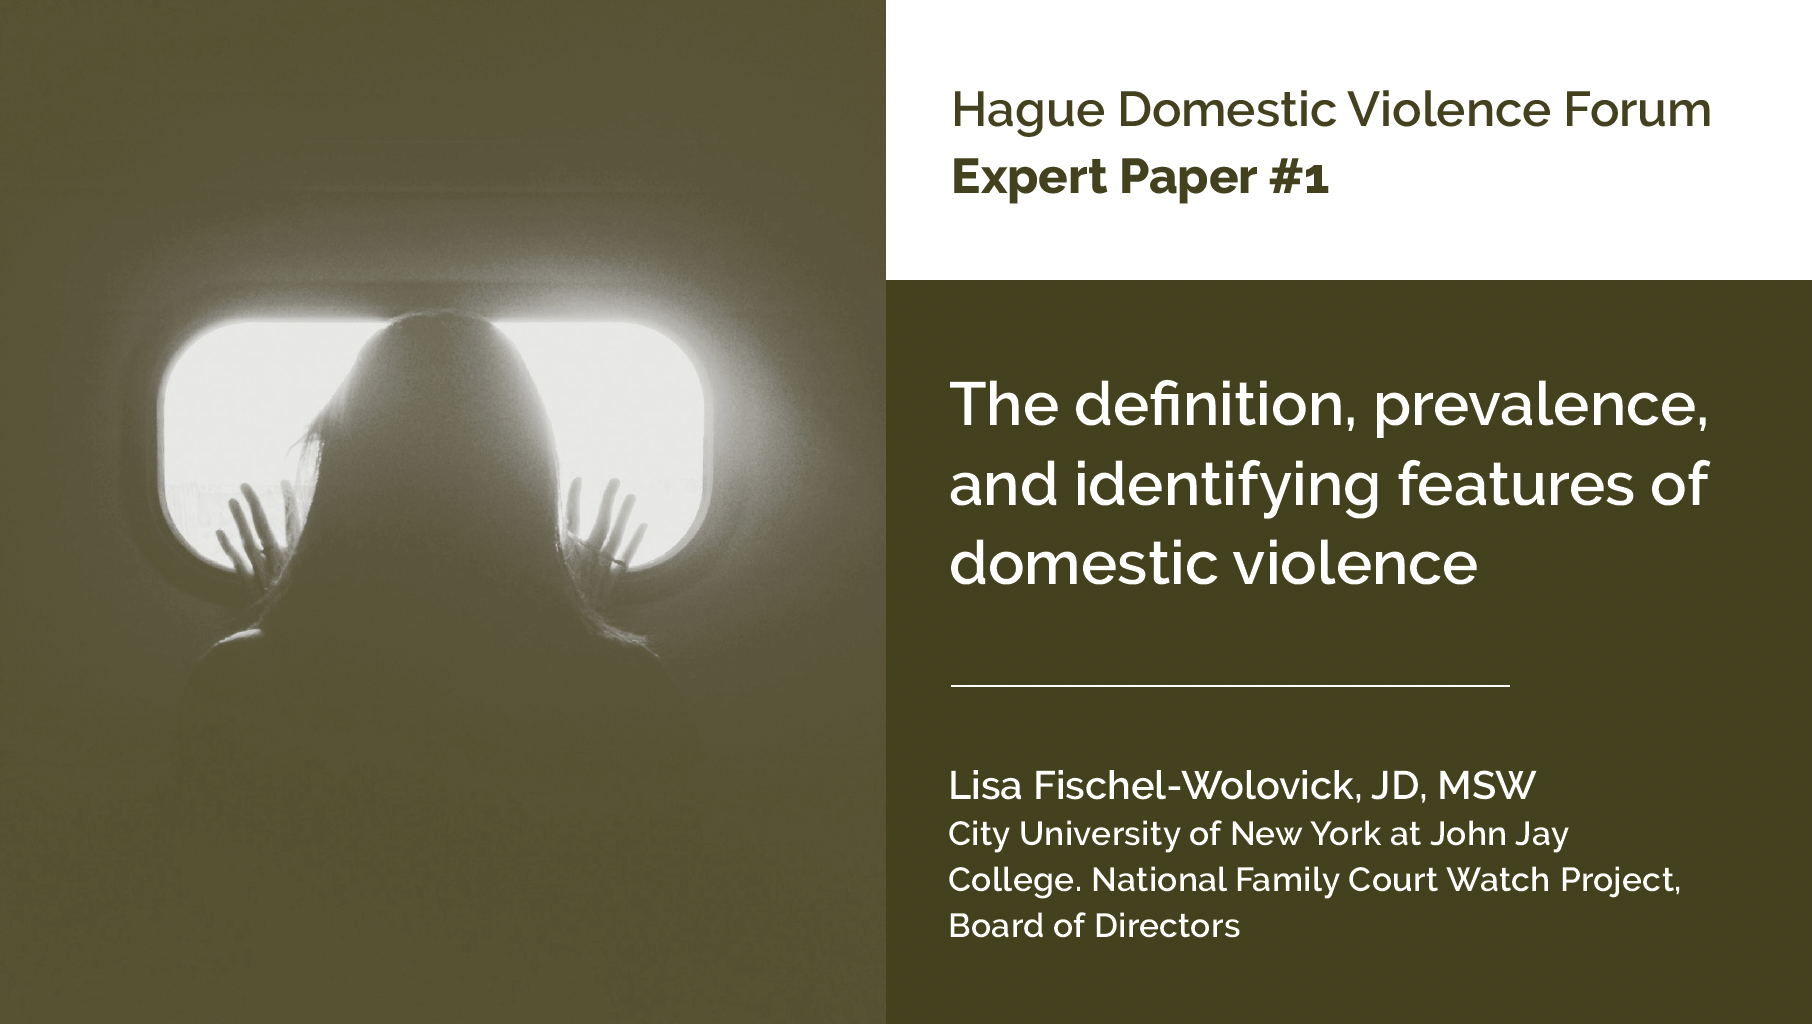 Expert Paper 1: The definition, prevalence, and identifying features of domestic violence